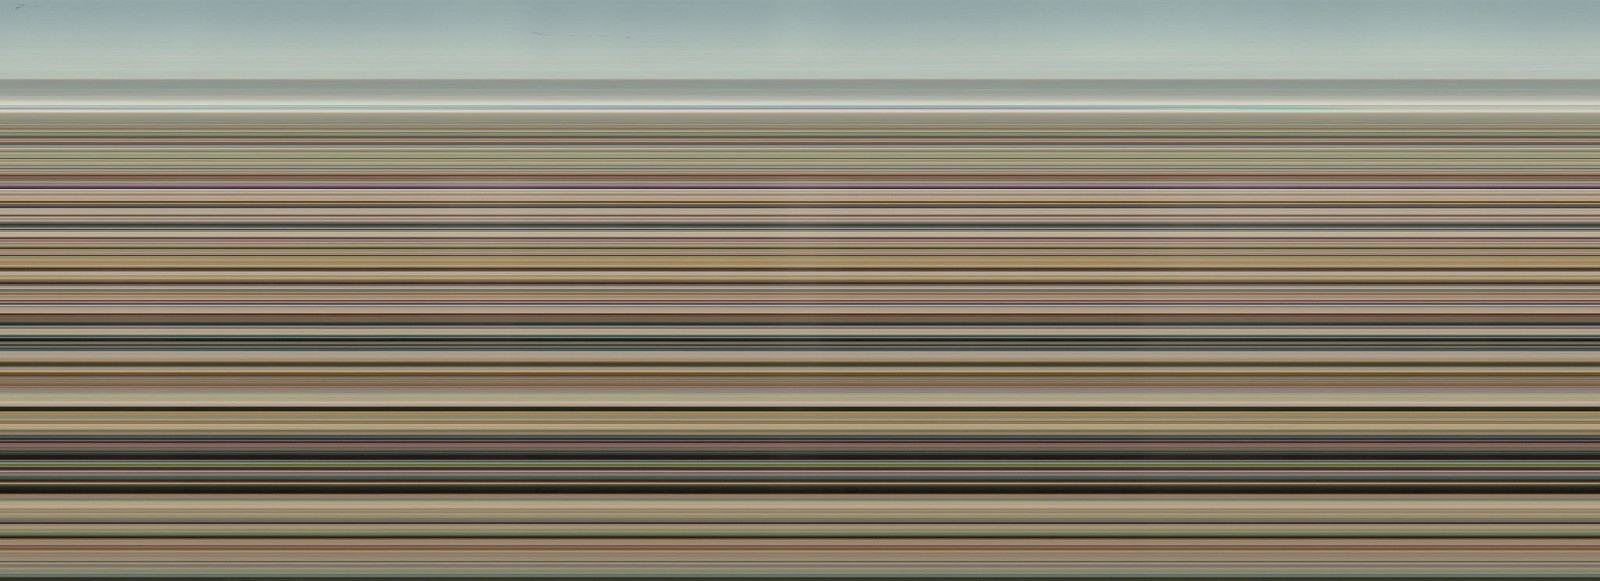 Jay Mark Johnson, POINT DUME WAVES #8, 2006 Malibu CA
archival pigment on paper, mounted on aluminum, 40 x 110 in. (101.6 x 279.4 cm)